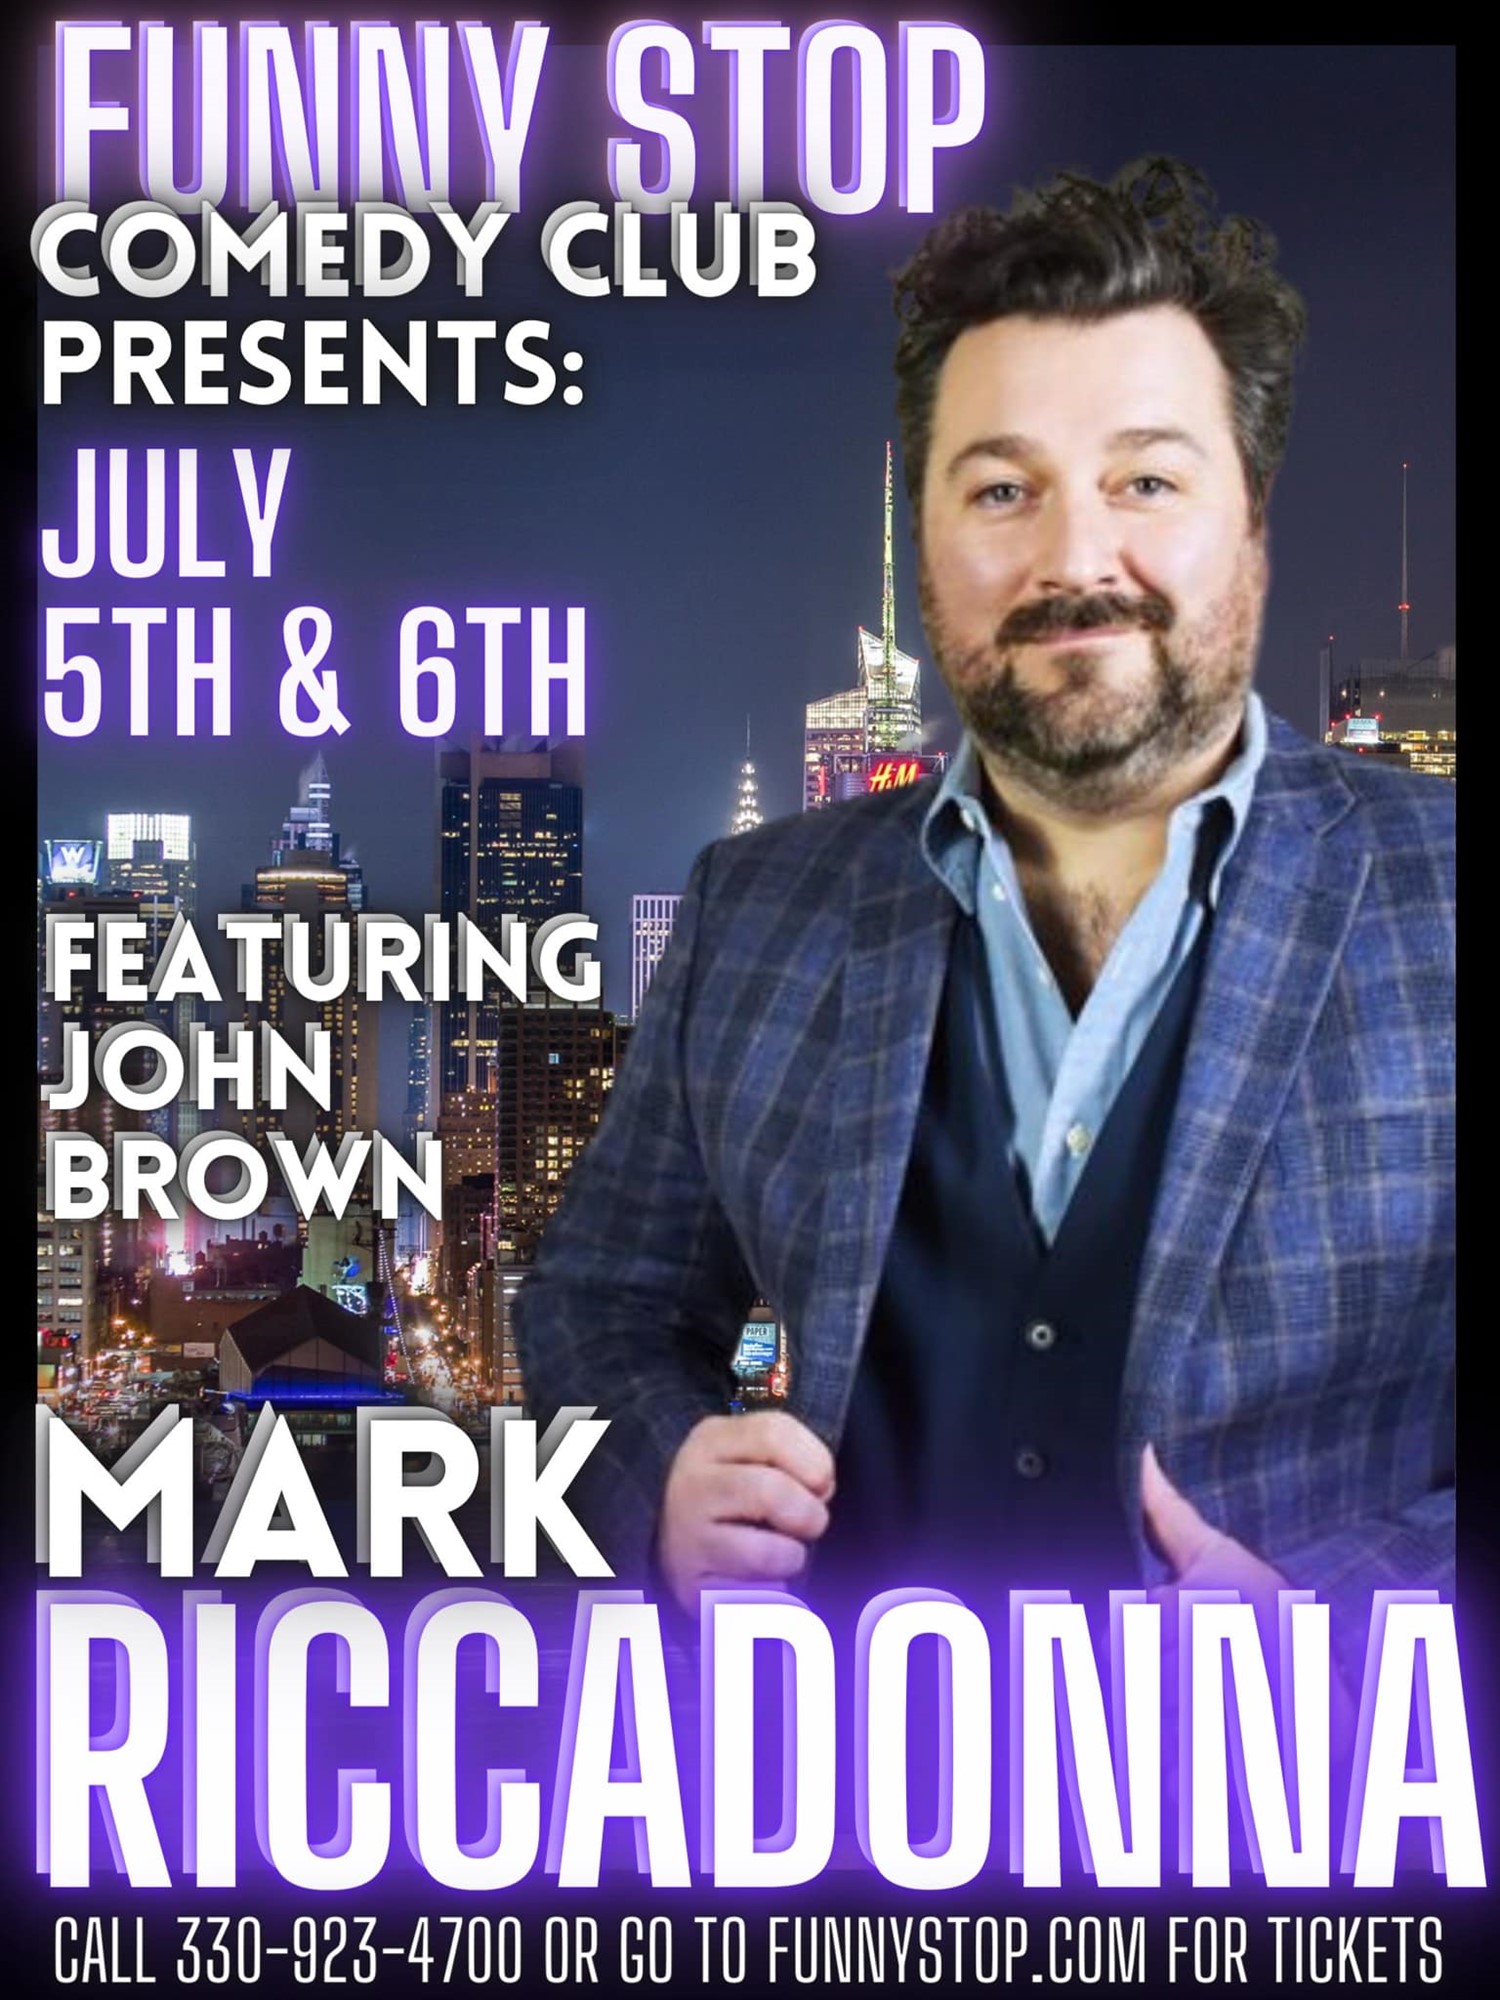 Mark Riccadonna - Sat. 7:30 PM Show Headlines at Funny Stop Comedy Club on Jul 06, 19:30@Funny Stop Comedy Club - Buy tickets and Get information on Funny Stop funnystop.online